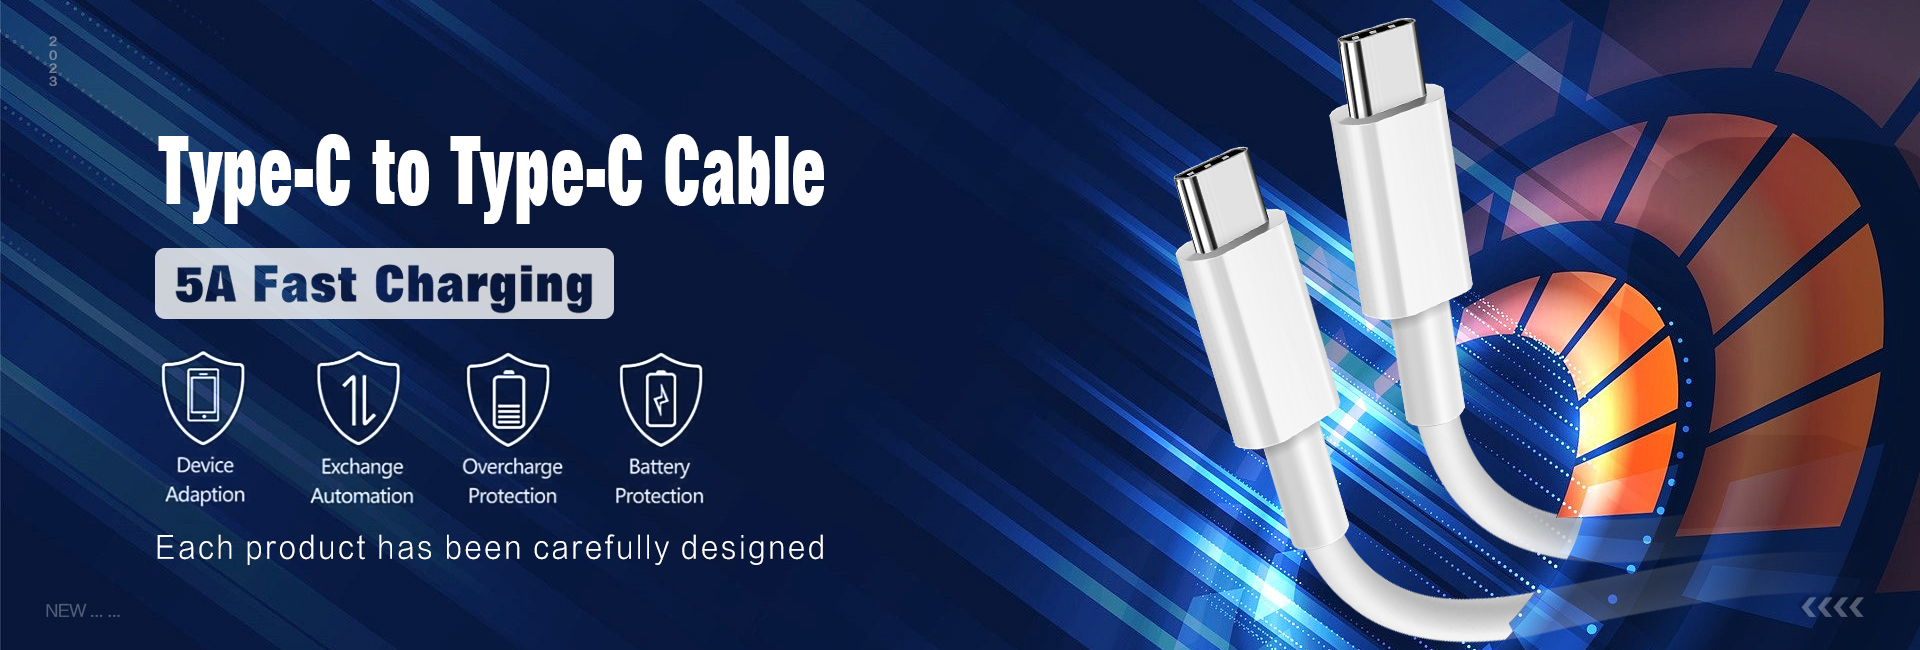 type c to type c cable 5A banner